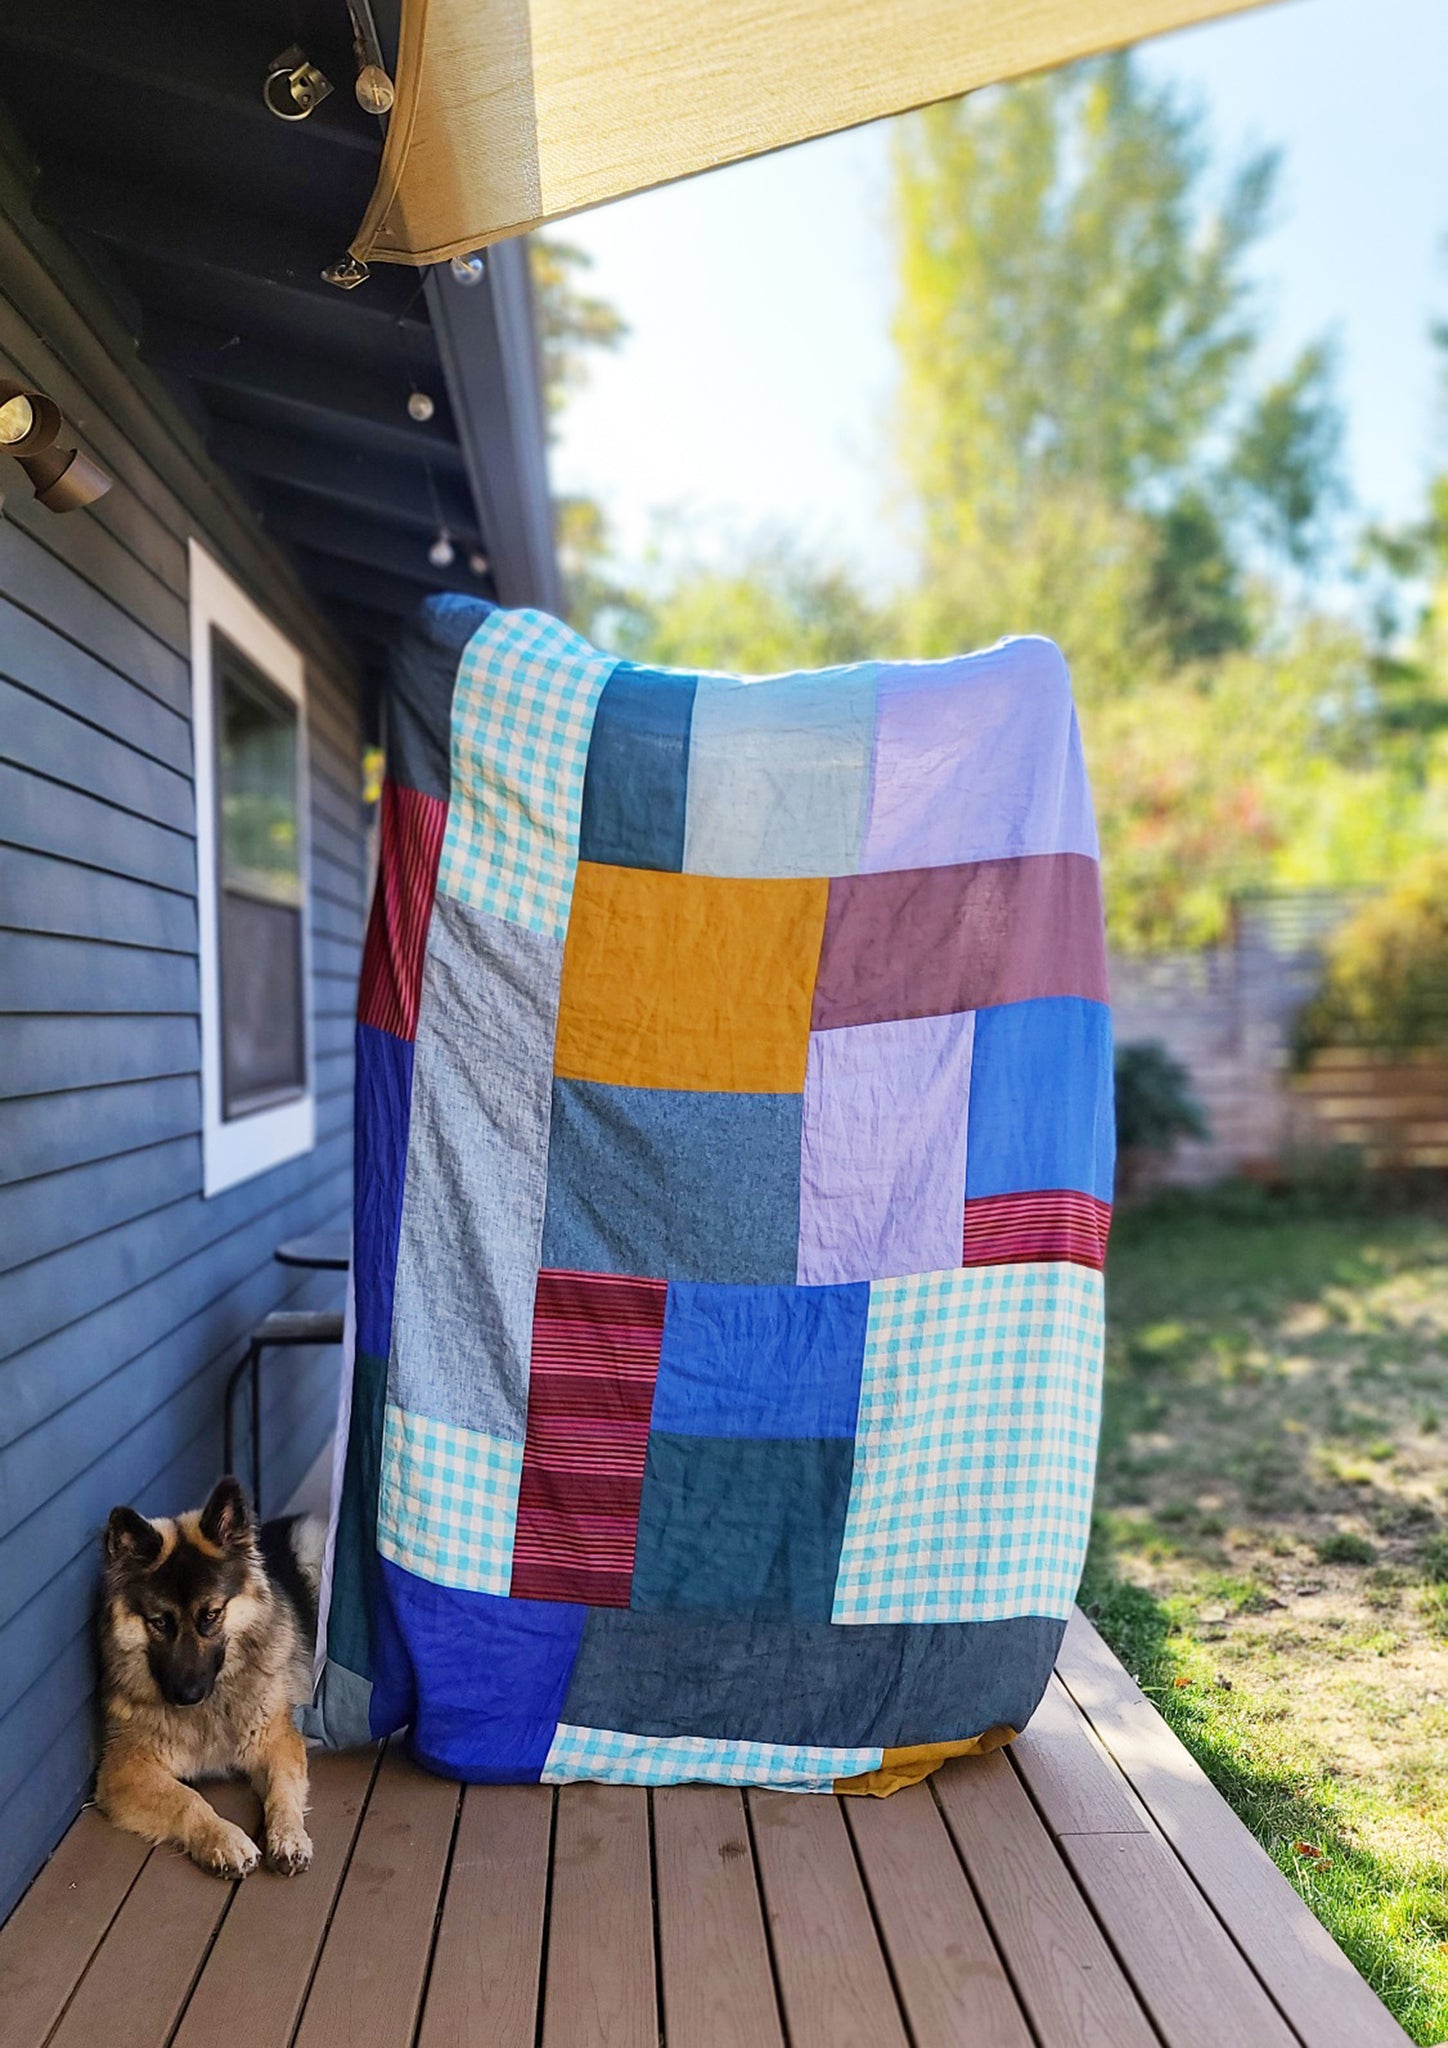 How to sew together a patchwork quilt